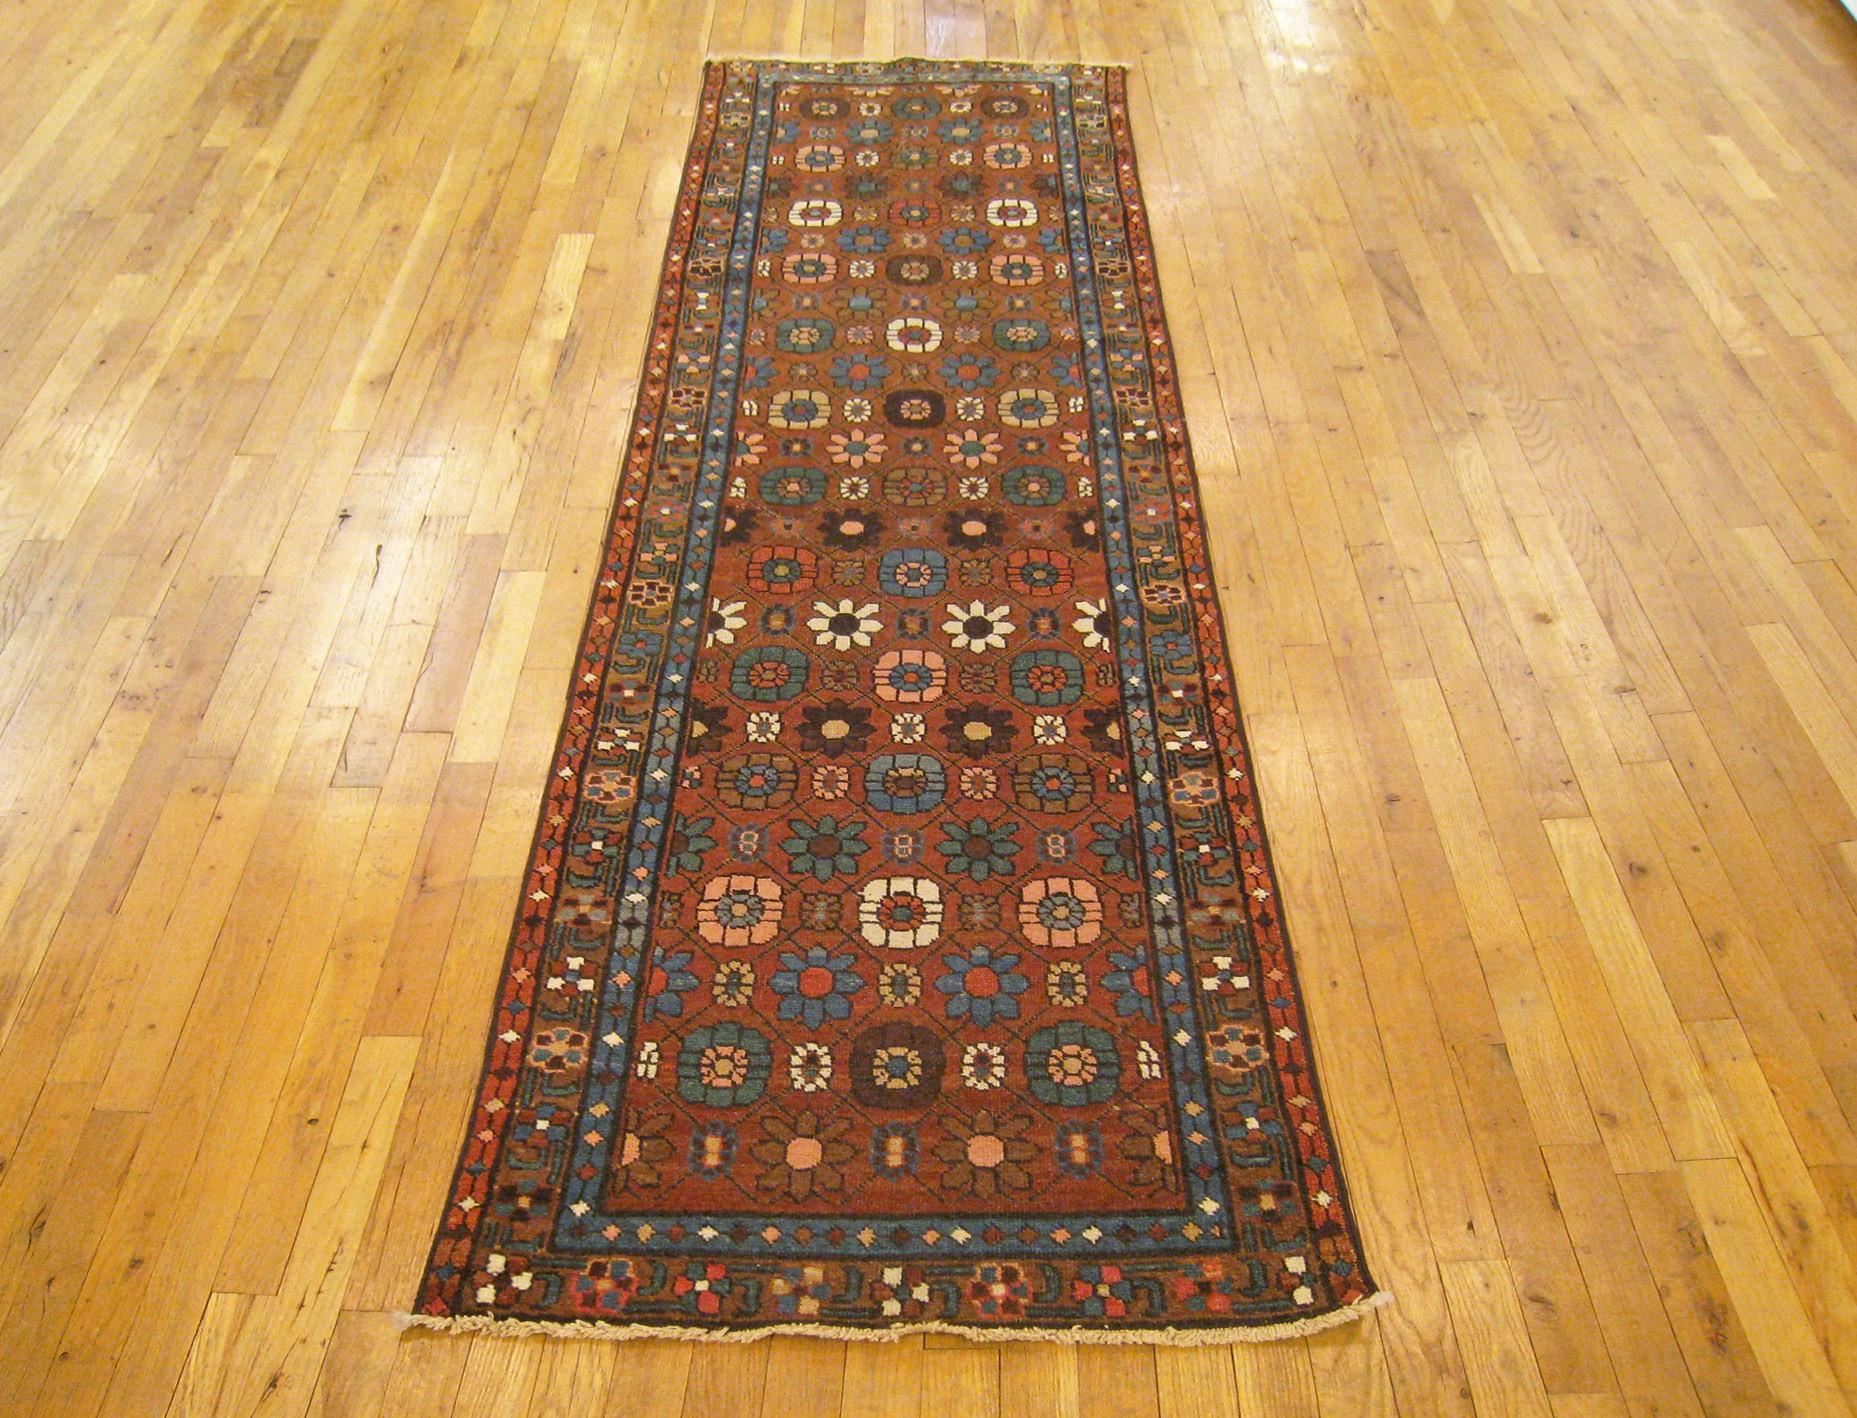 An antique Persian Heriz oriental rug in runner size, size 9'0 x 2'6, circa 1920. This handsome hand-knotted carpet features a stylish all-over flower-head design in the dark red central field. The field is enclosed within a well crafted dark red